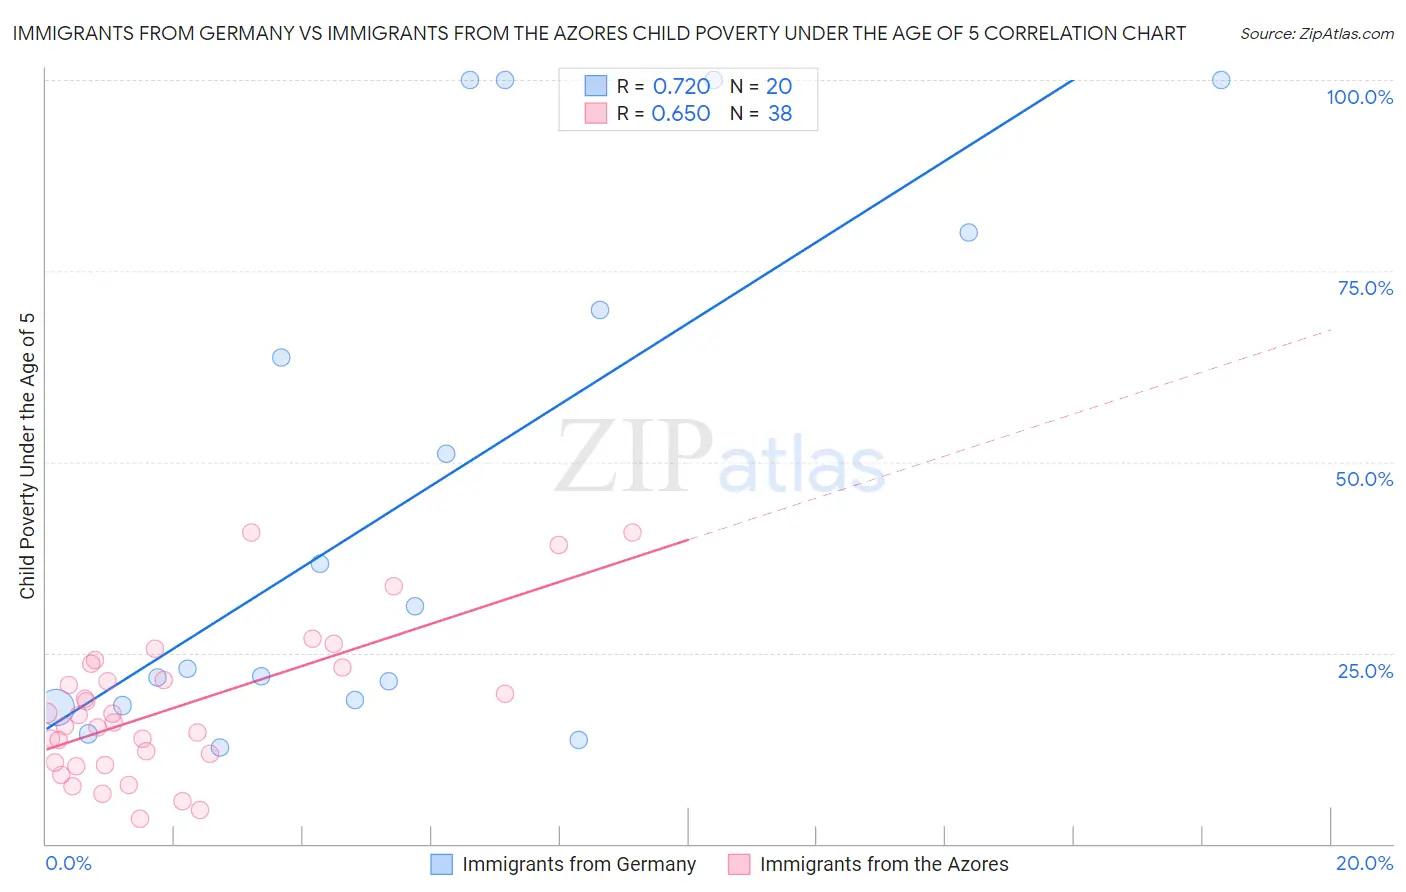 Immigrants from Germany vs Immigrants from the Azores Child Poverty Under the Age of 5